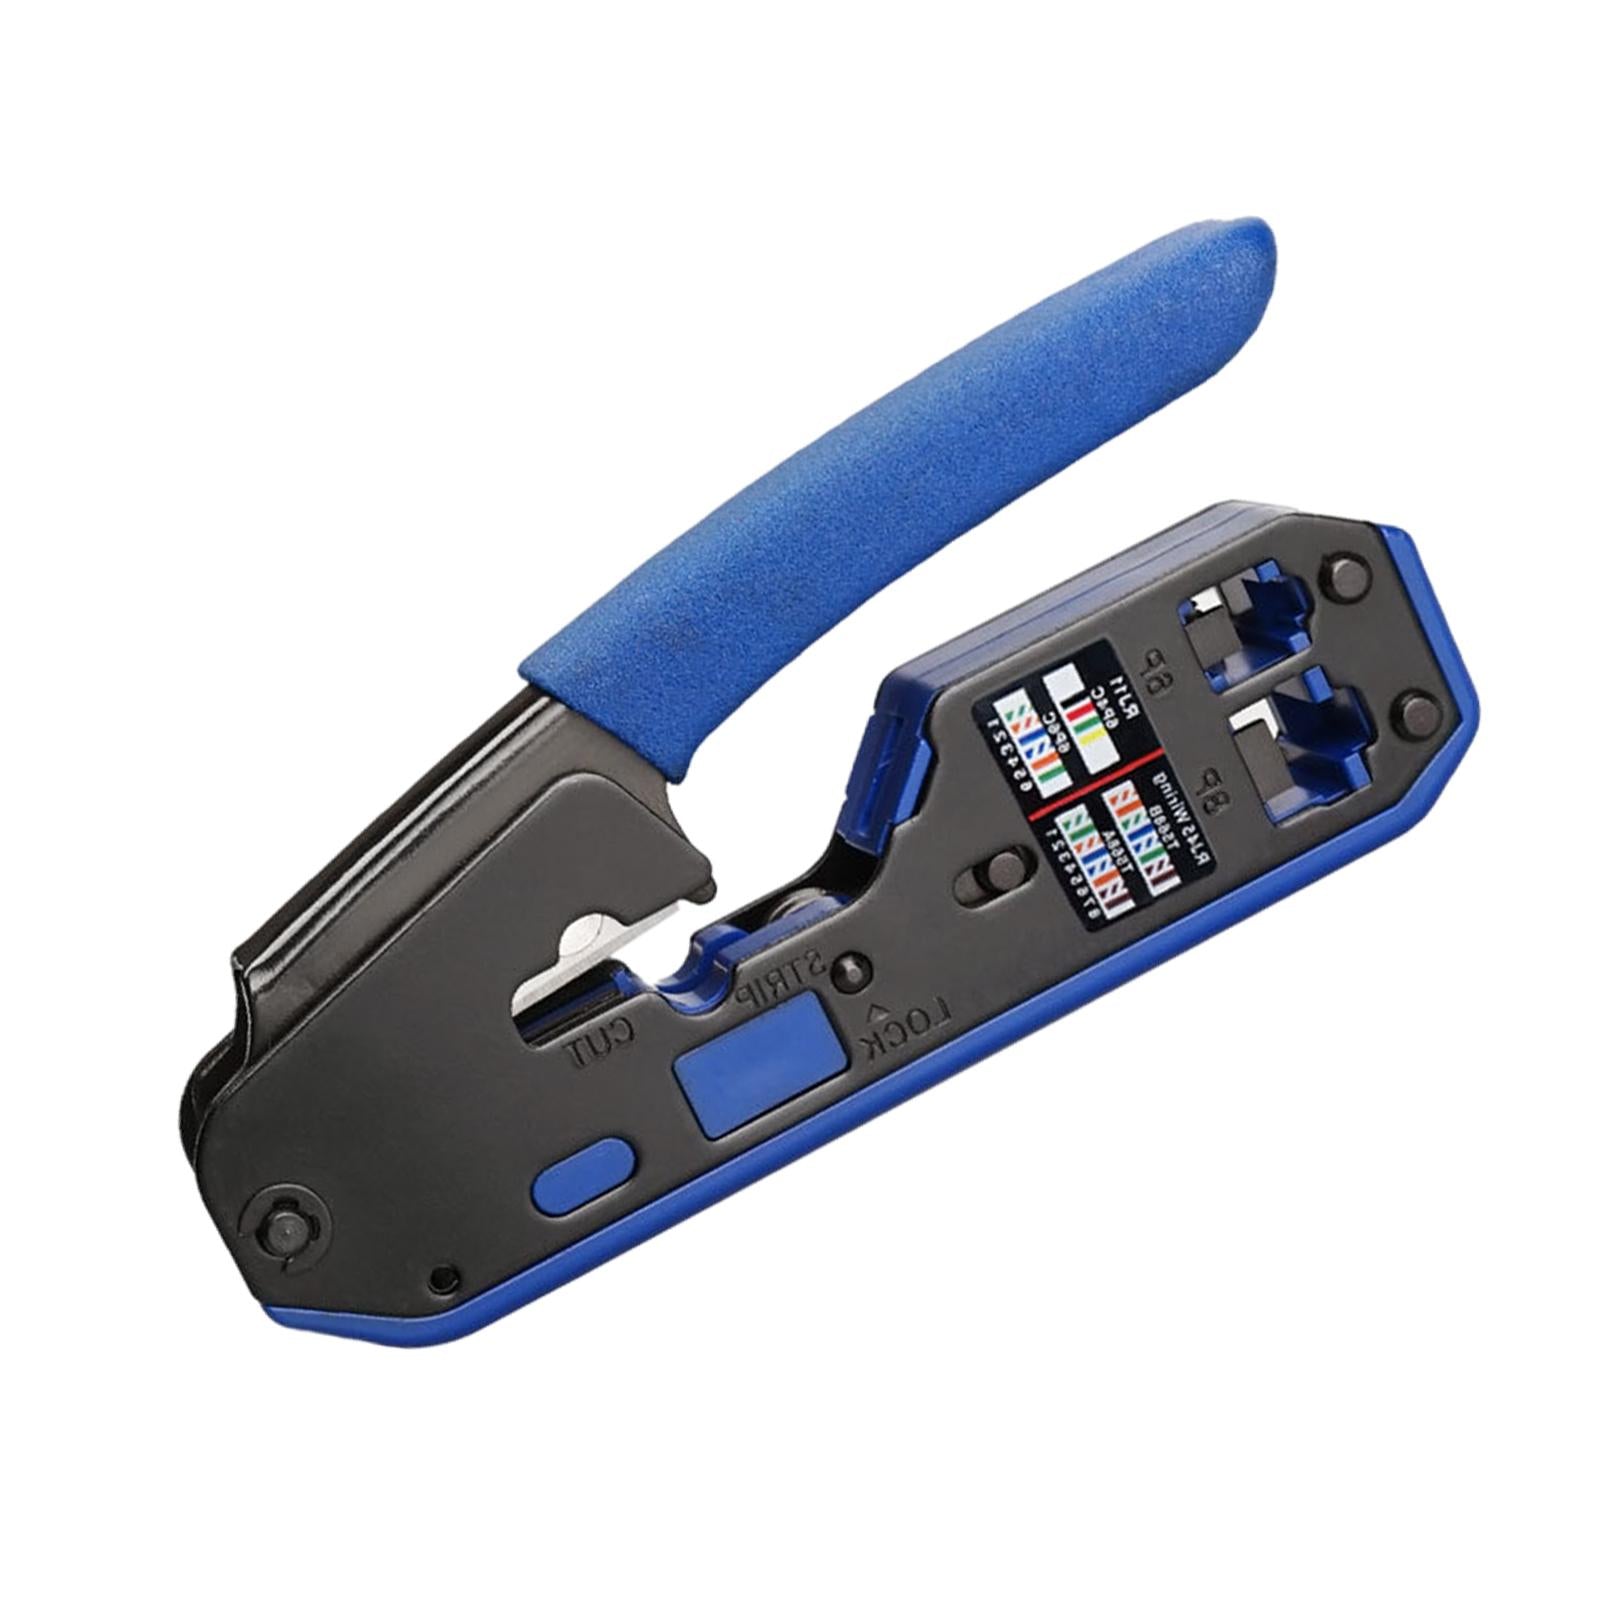 Network Cable Pliers Clamp Pliers Wire Stripper Portable Crimp Tool for 8P6P